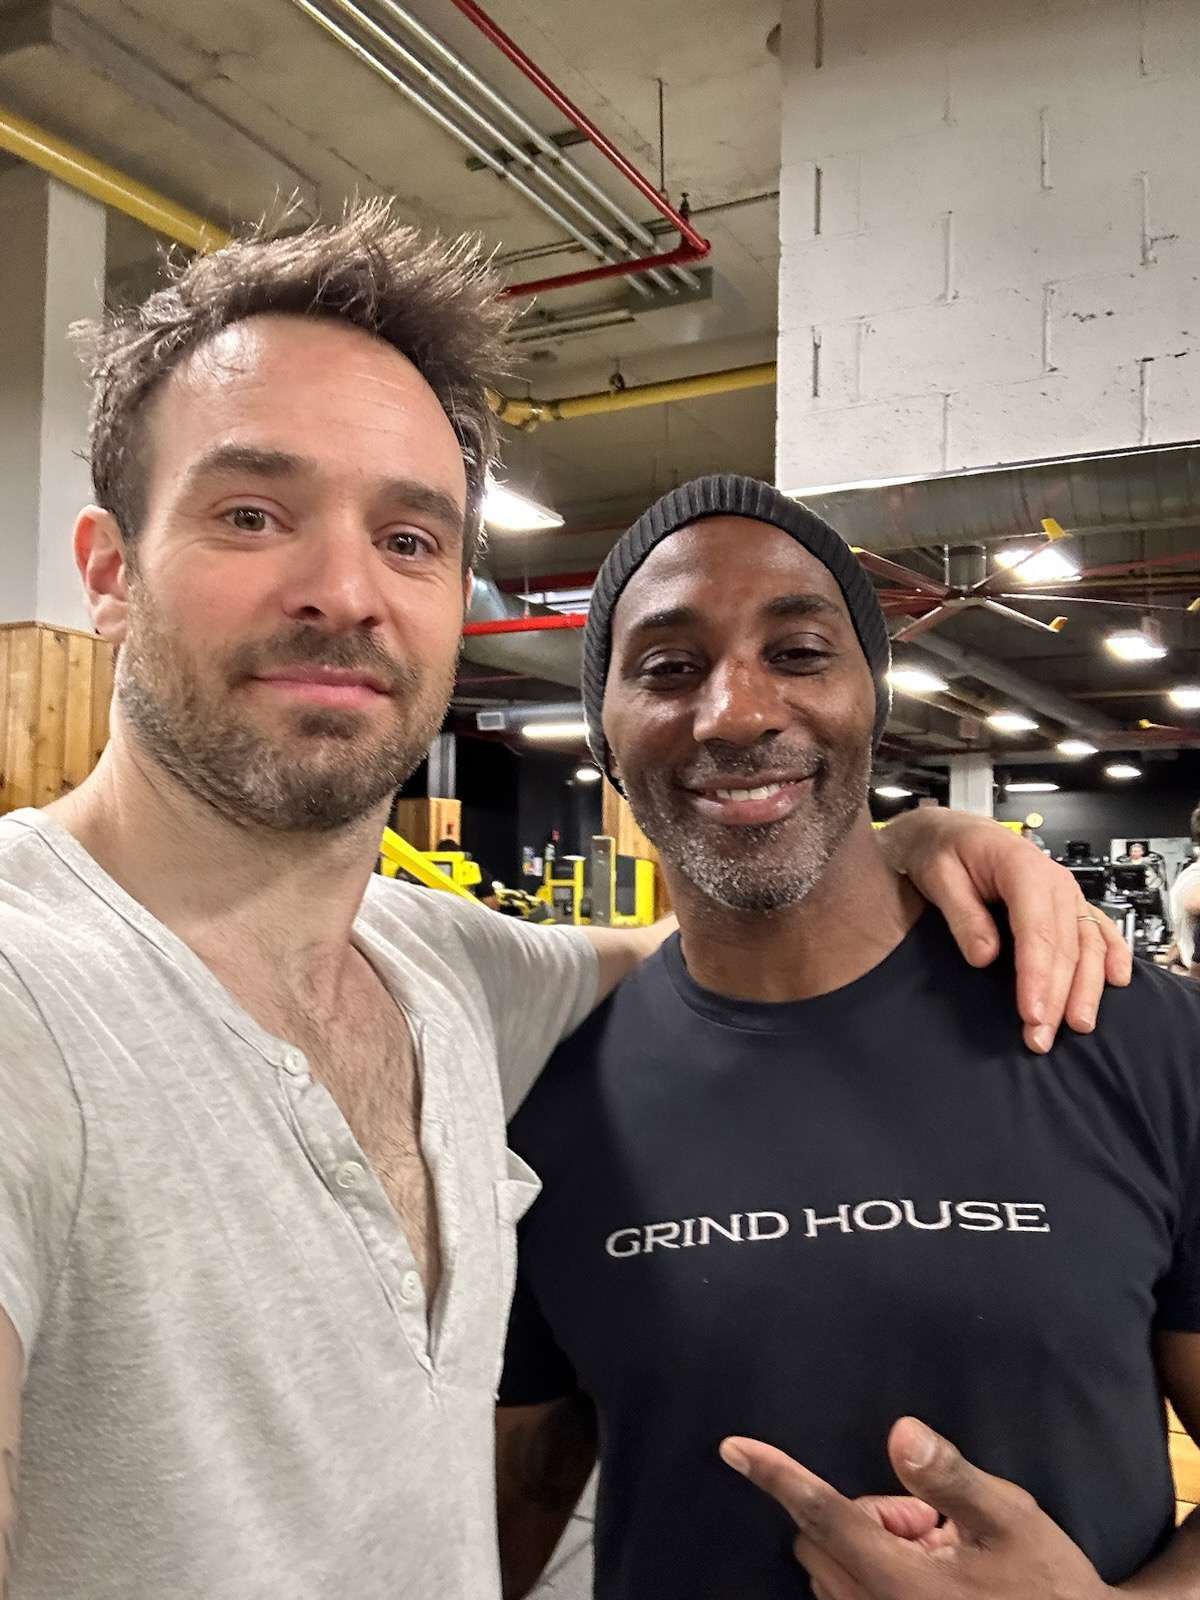 Charlie Cox poses for a photo with his trainer Naqam Washington at the gym.